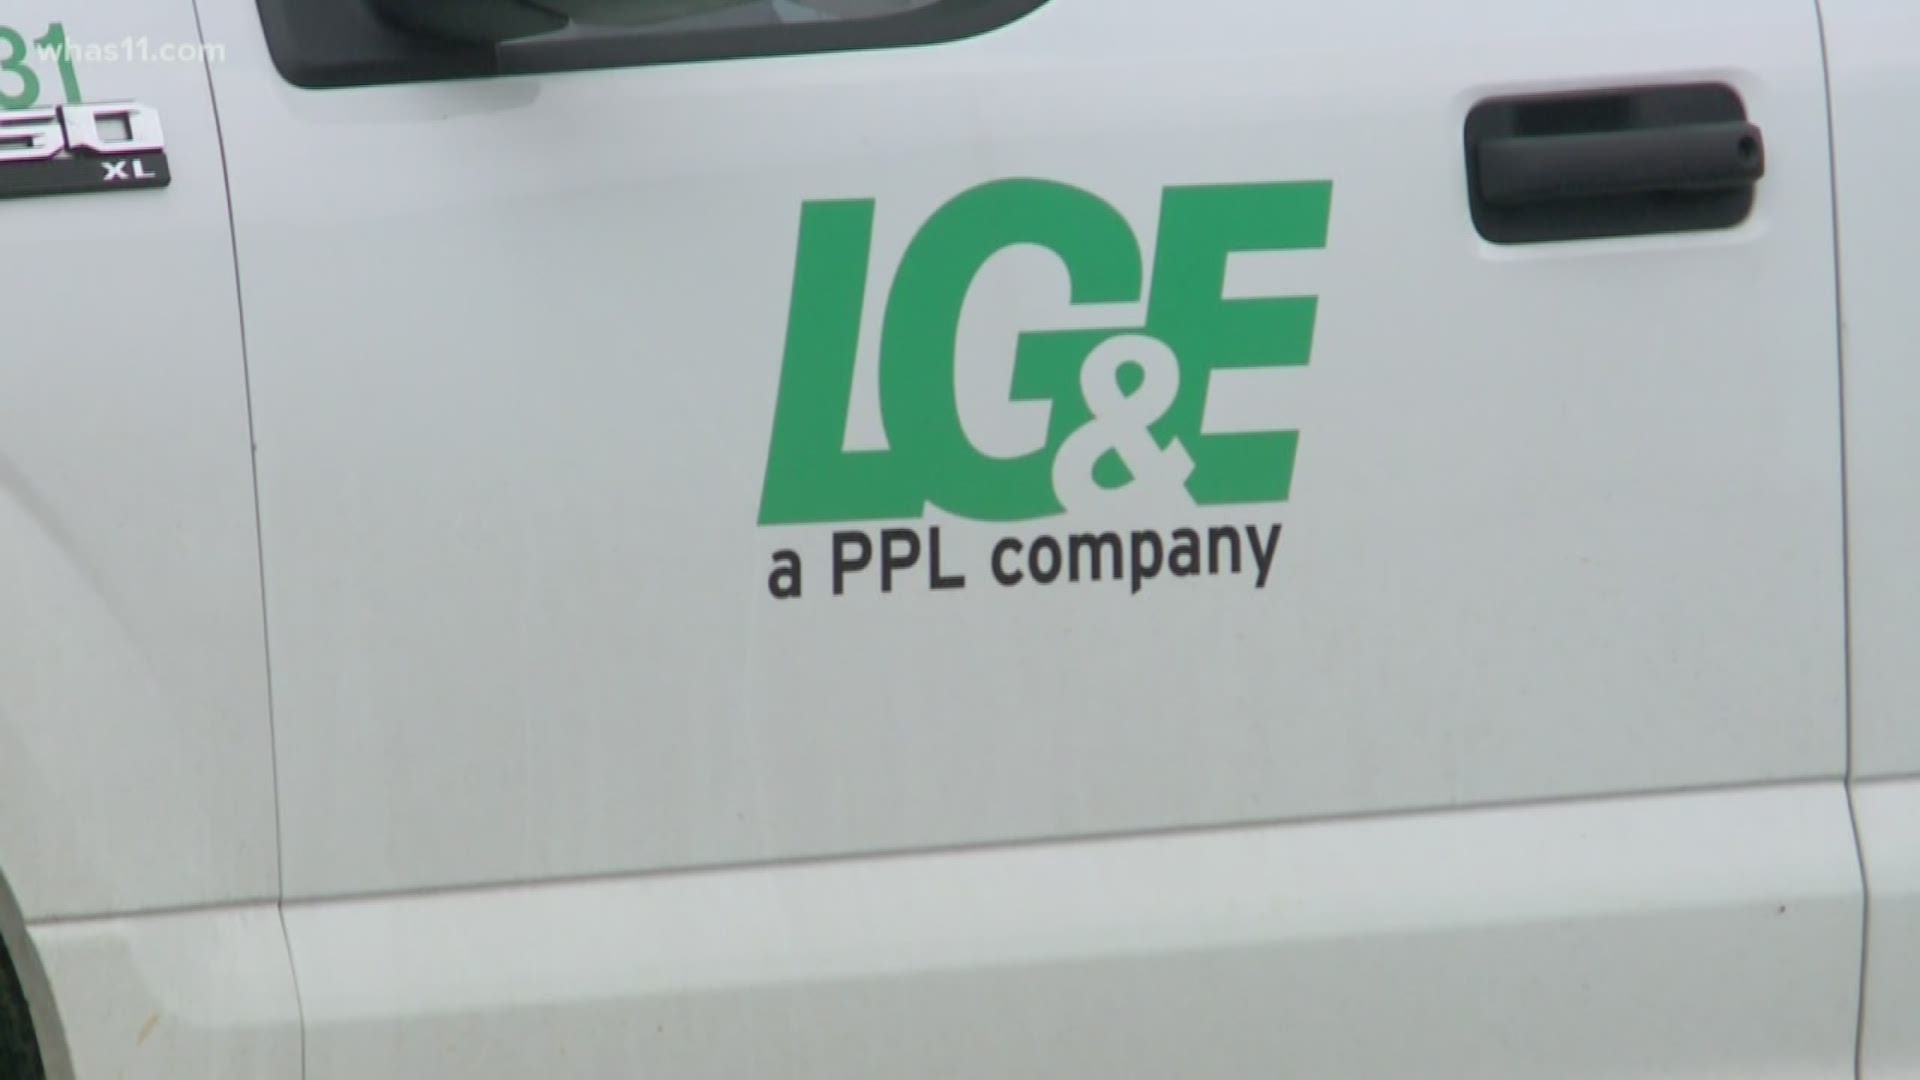 Authorities are warning residents of a scam targeting LG&E customers.